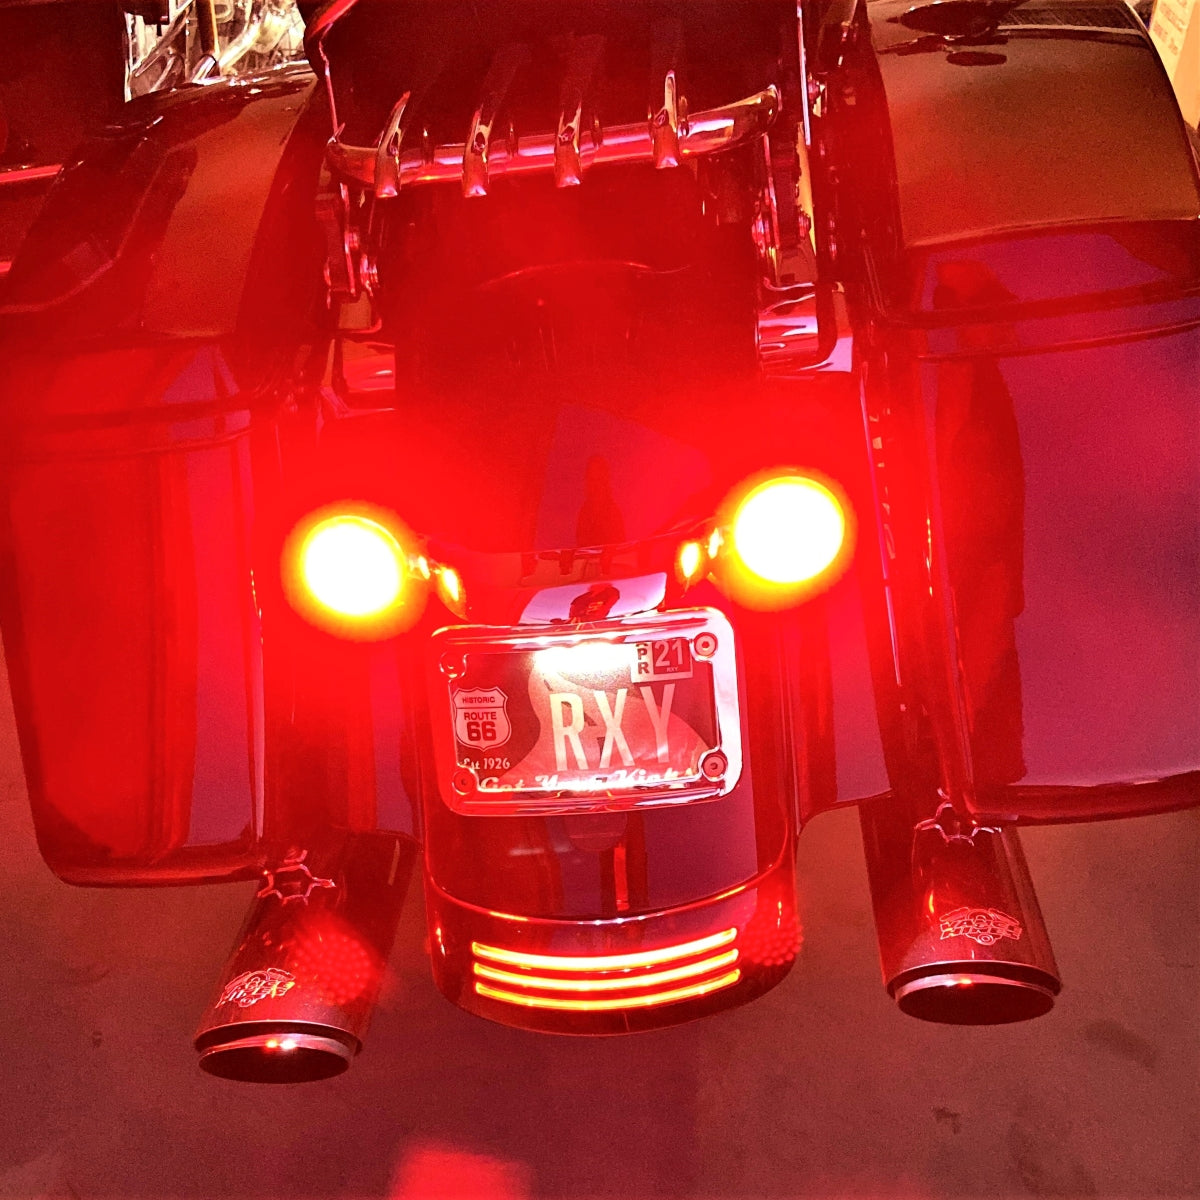 GeezerEngineering LED Light Bulb Turn Signals (red or amber) fits 1157 socket for Harley